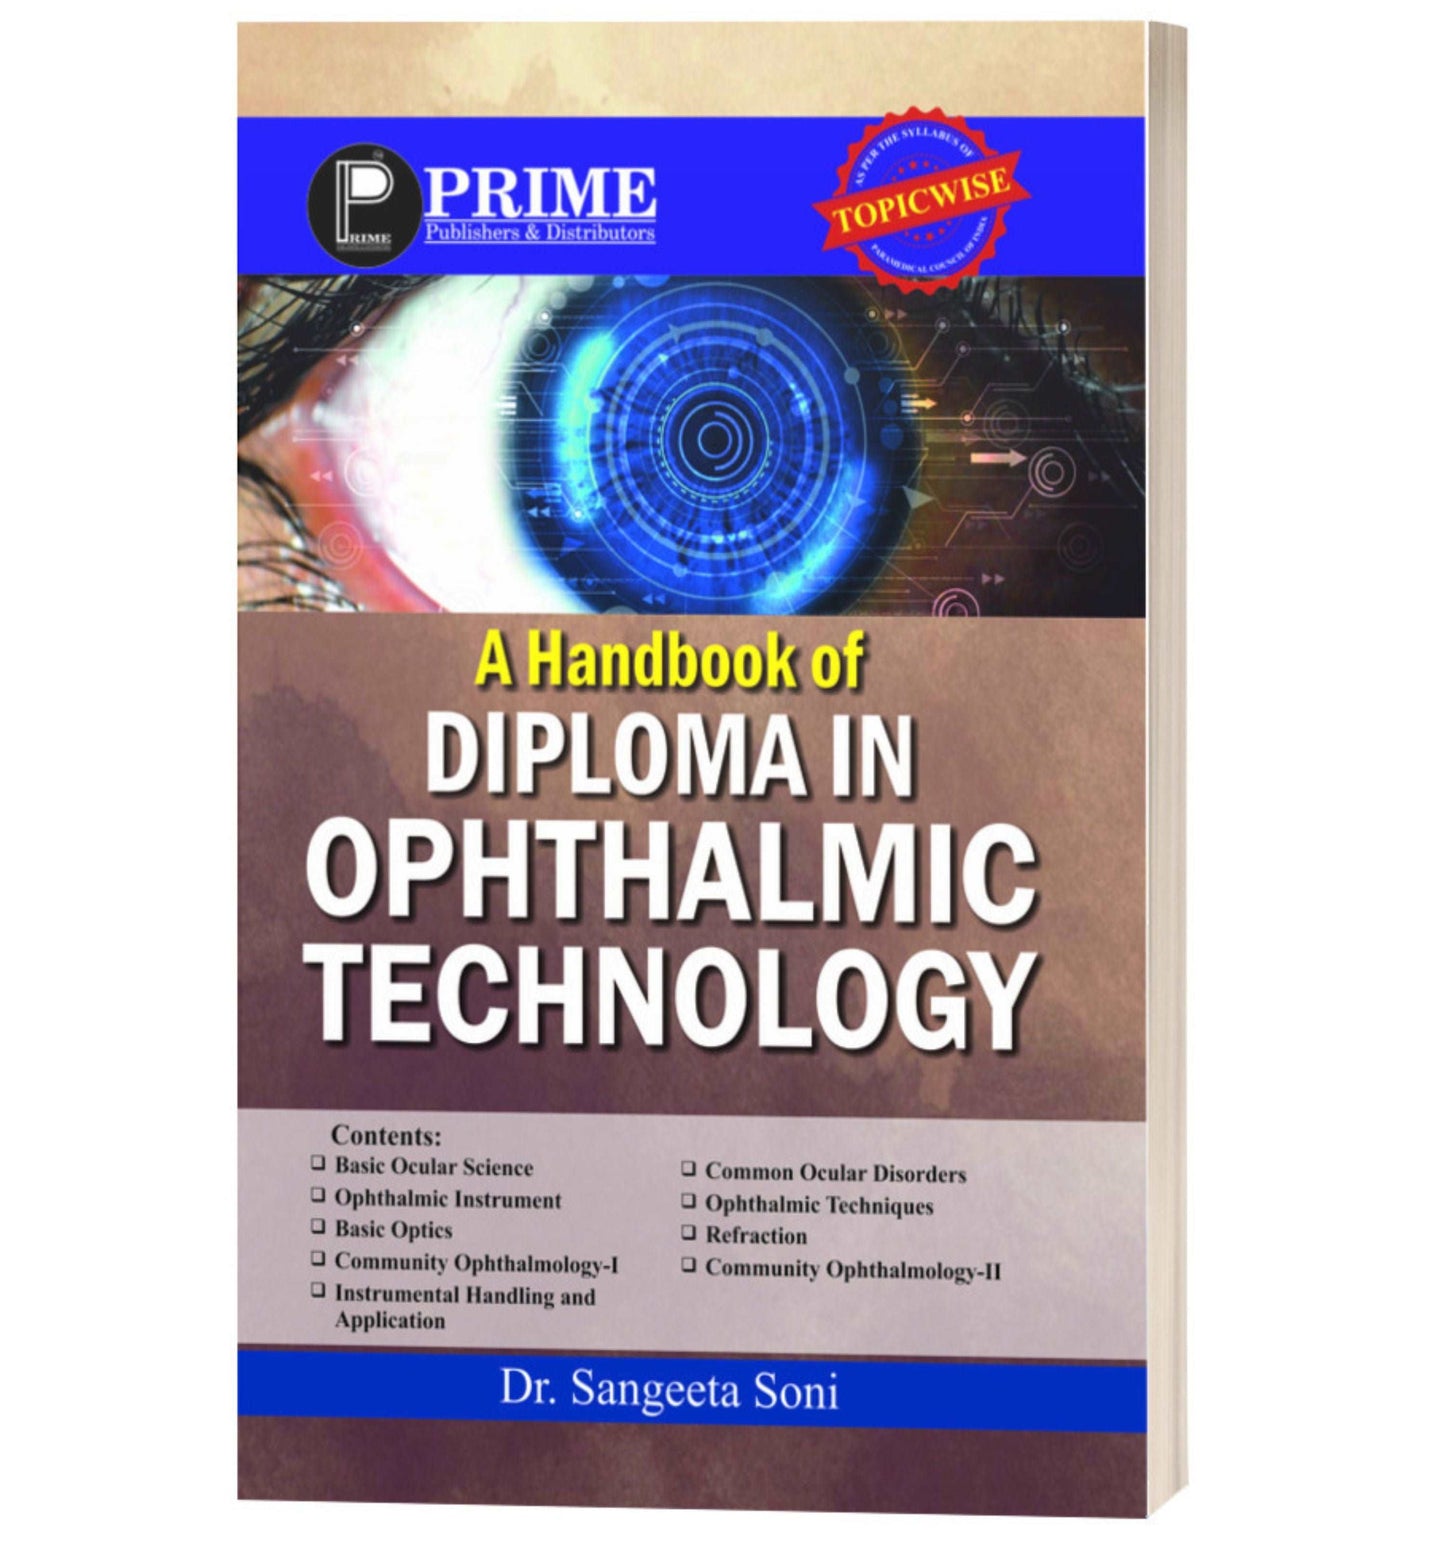 A handbook of Diploma in Ophthalmic Technology